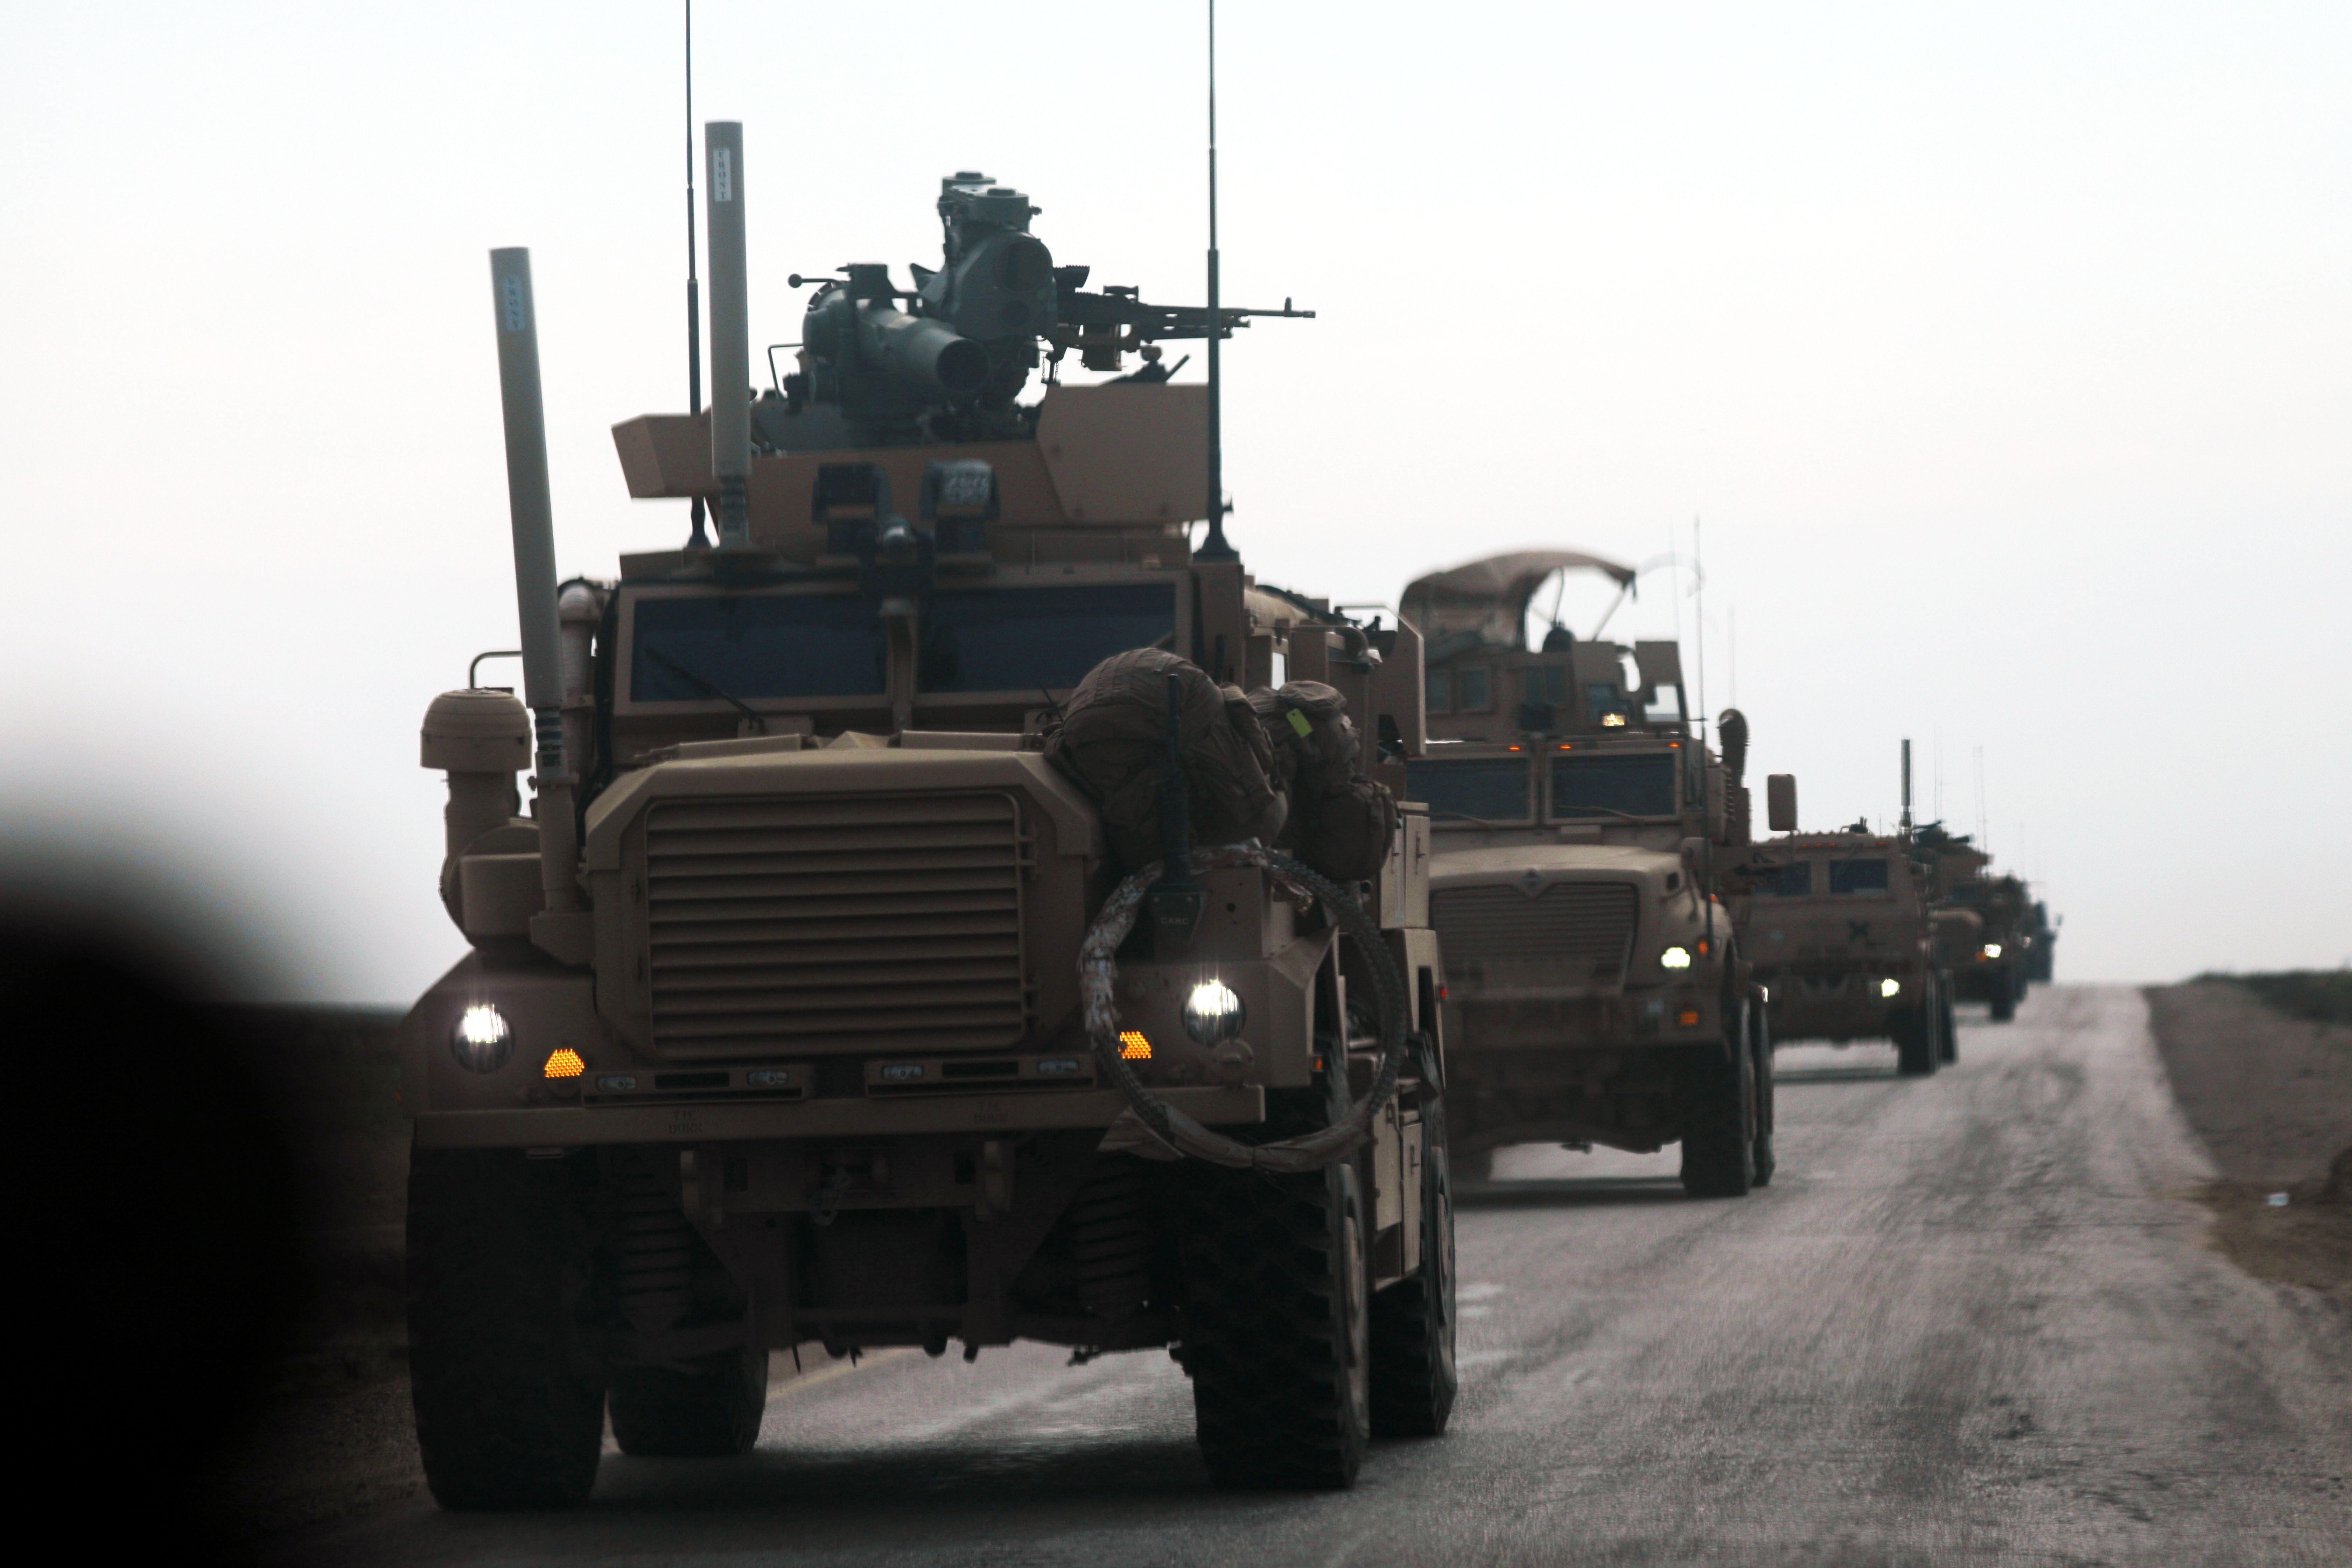 U.S.-backed coalition military vehicles during an operation to expel ISIS from the eastern Syrian province of Deir Ezzor on Feb. 21, 2019.